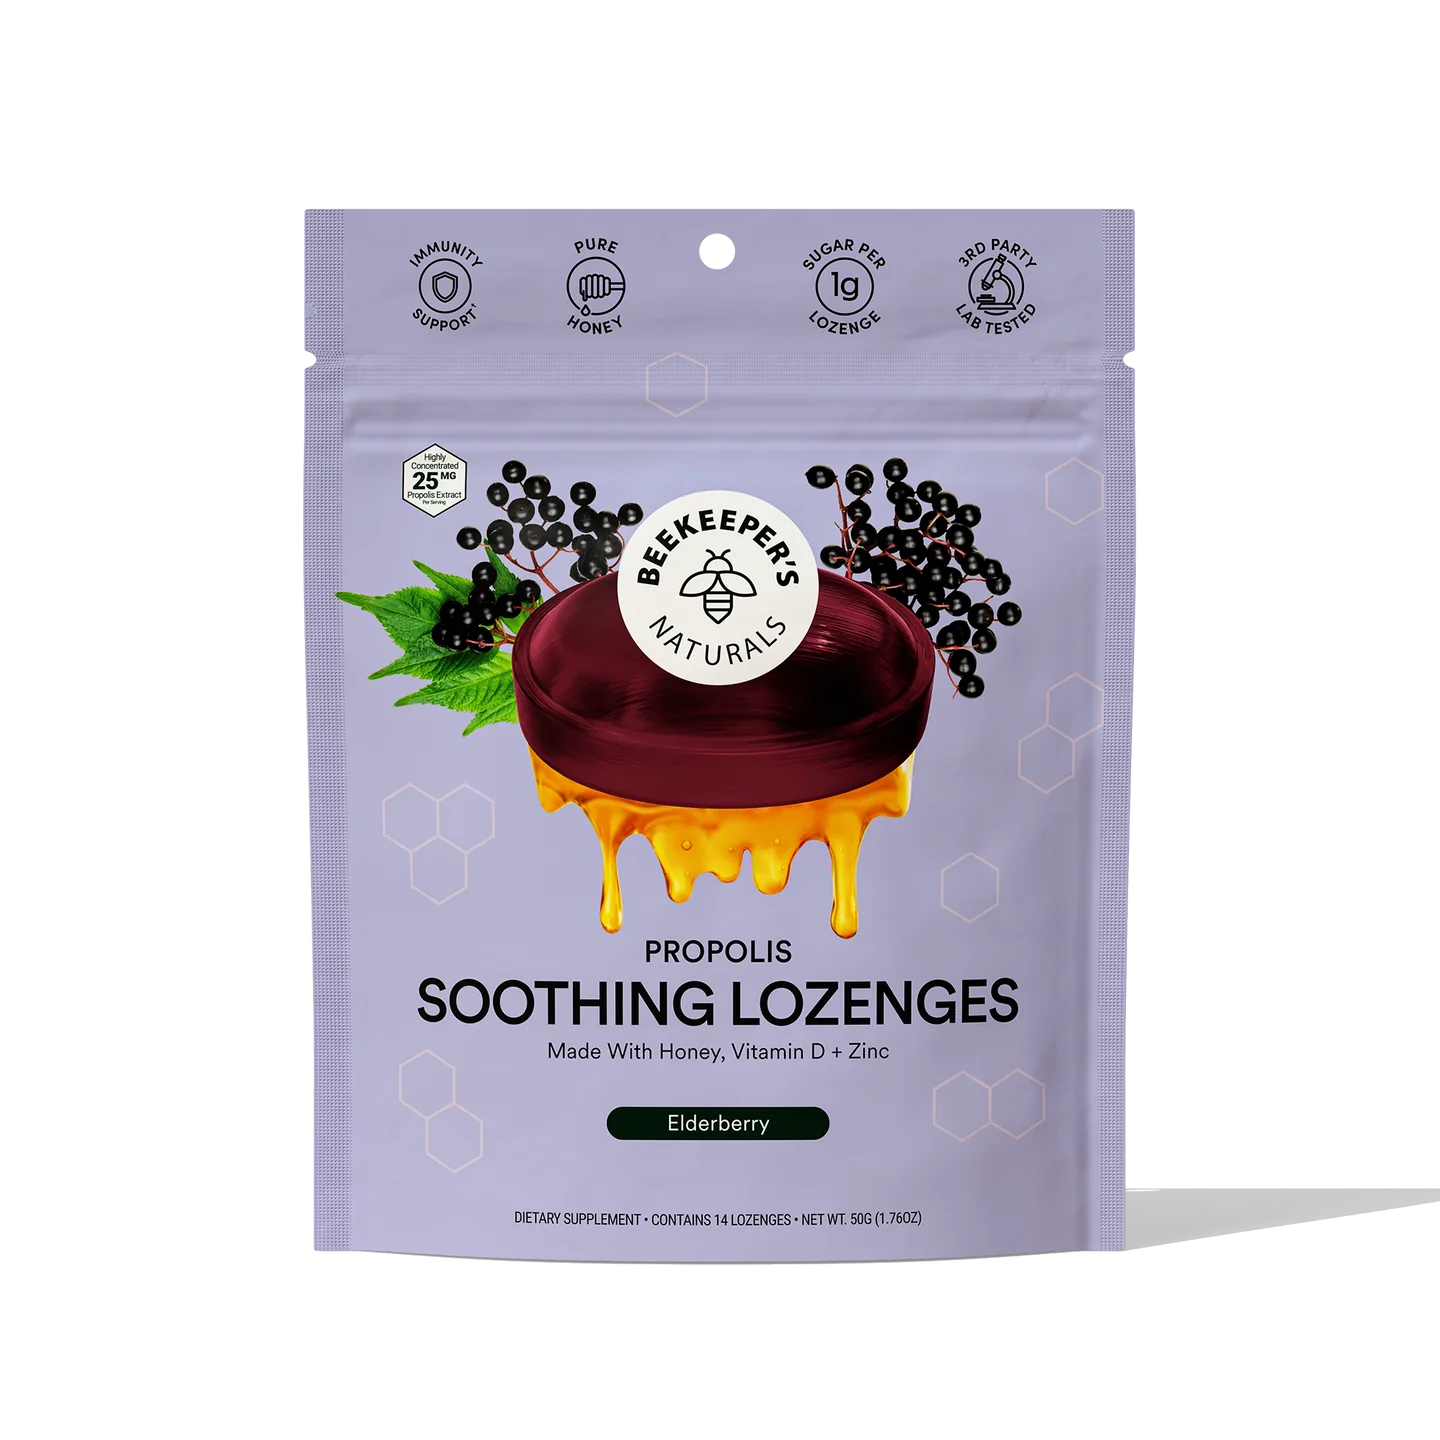 SOOTHING LOZENGES